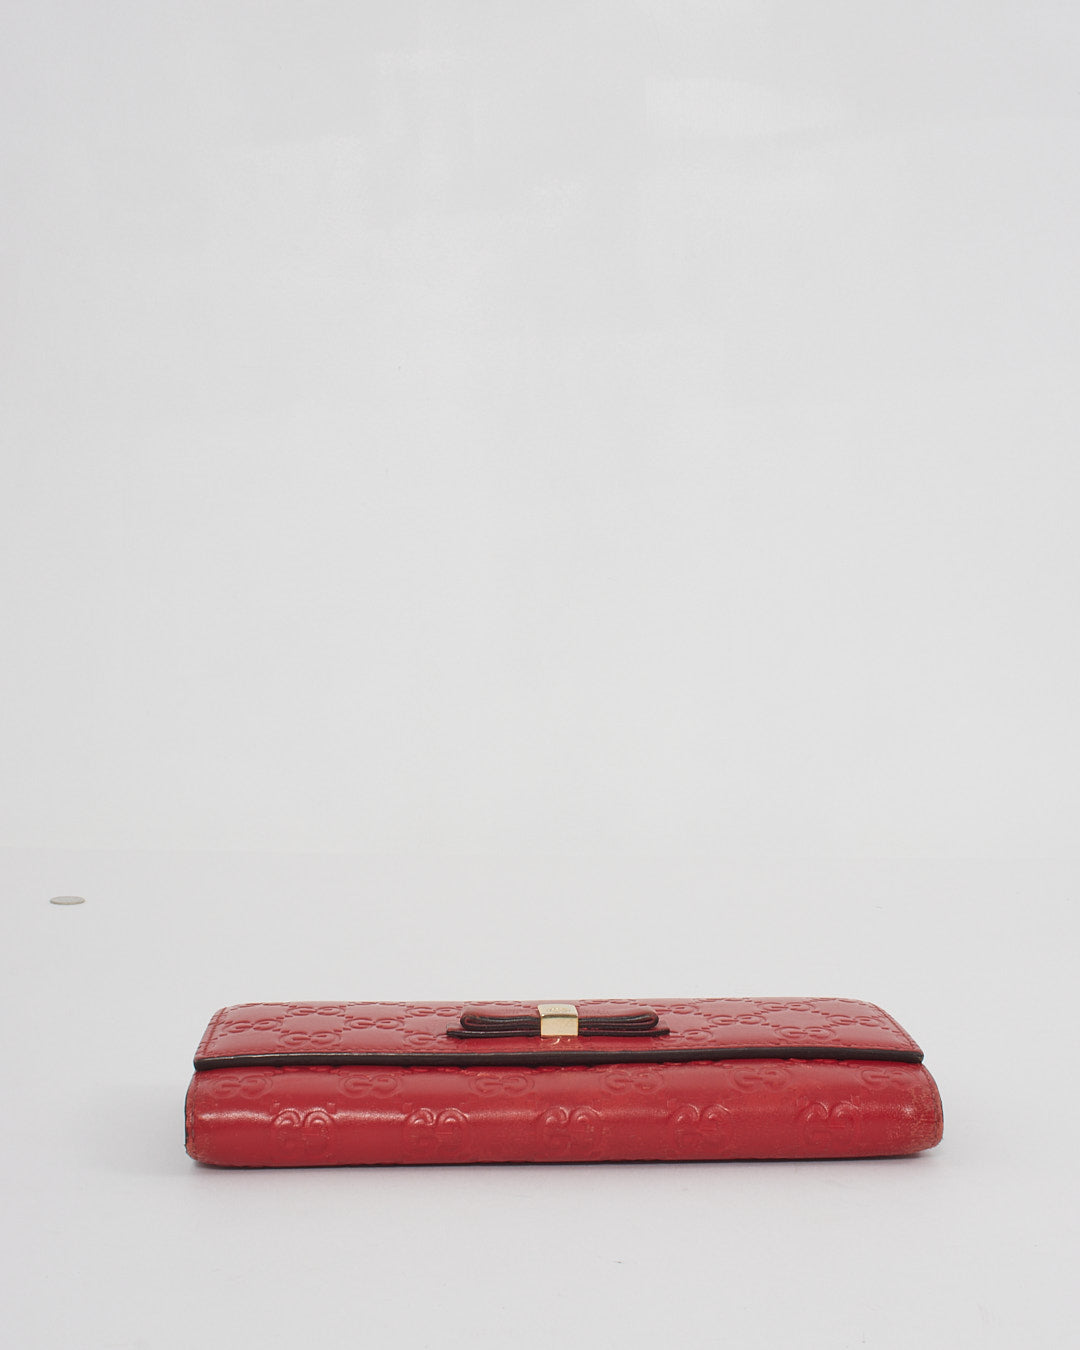 Gucci Red Leather Guccissima Bow Continental Wallet